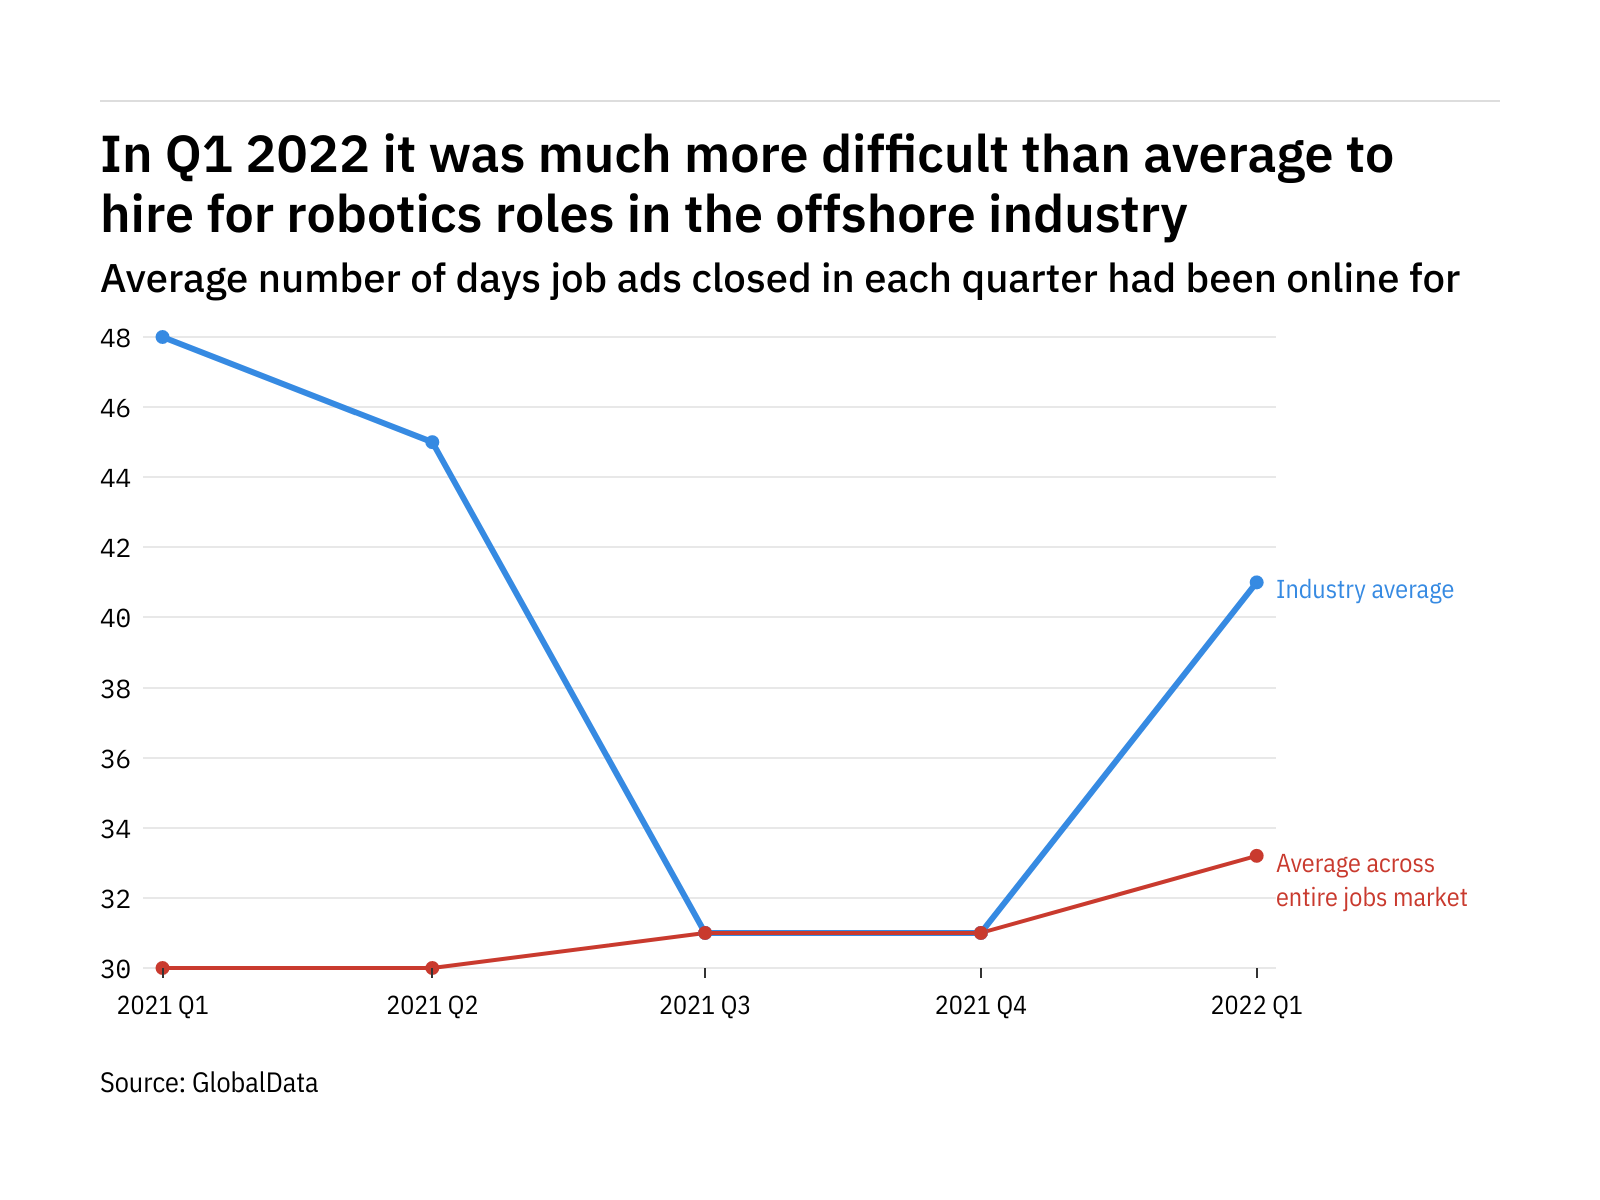 Robotics vacancies in the offshore industry were the hardest tech roles to fill in Q1 2022